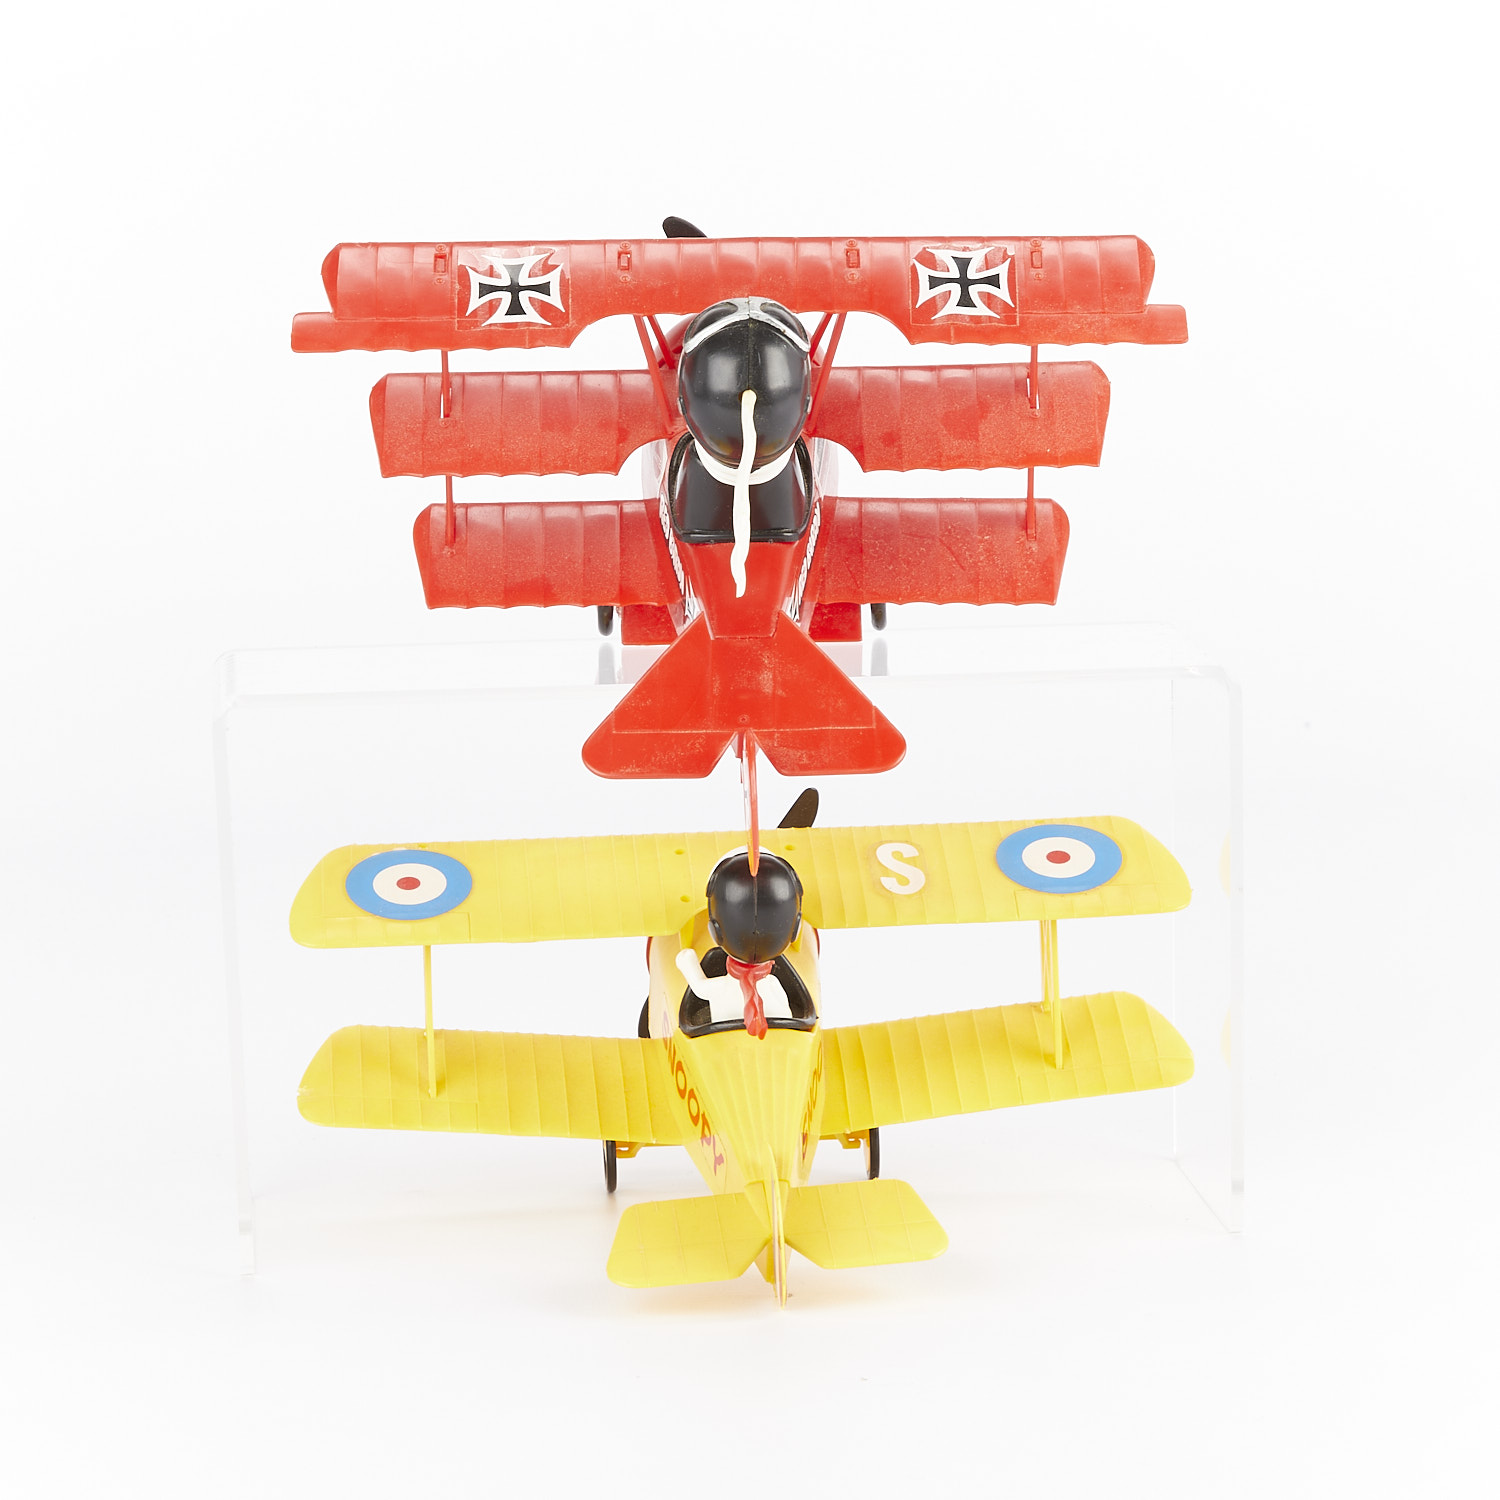 2 Toy Planes Red Baron & Flying Ace Snoopy - Image 5 of 10